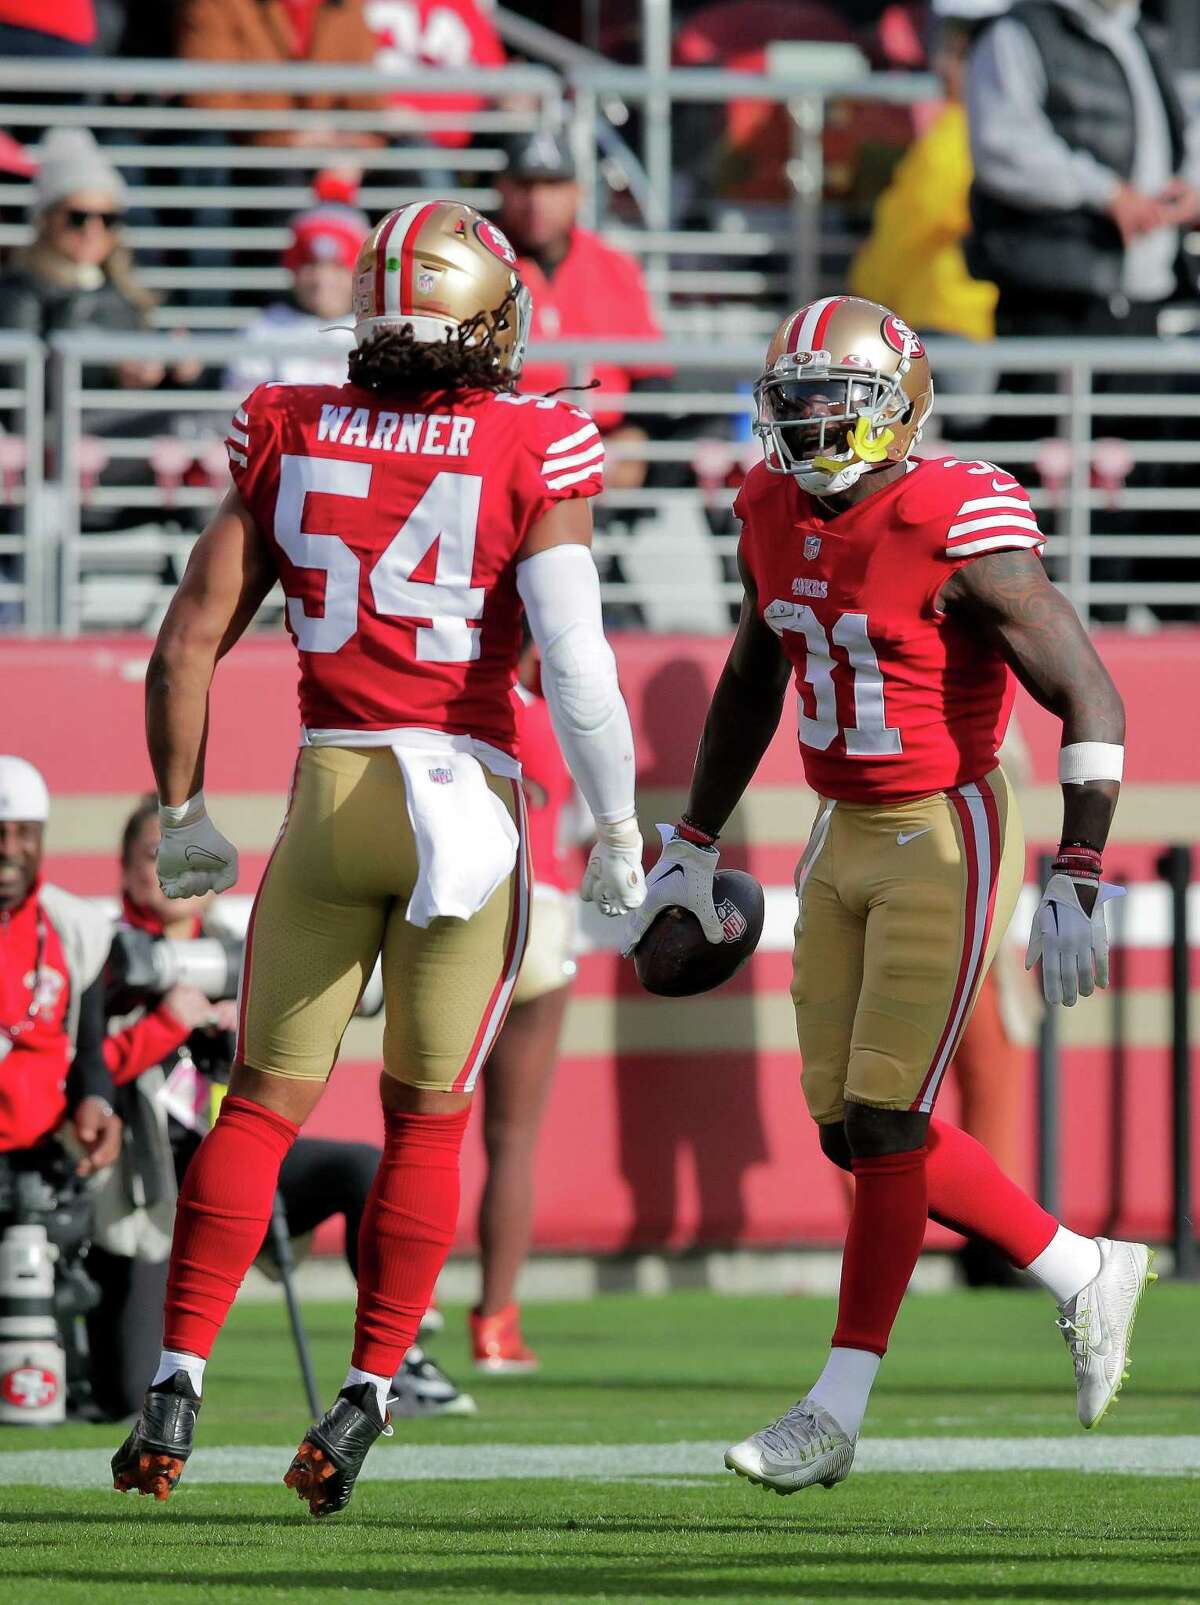 Fred Warner (54) and Tashaun Gipson (51) celebrated Gipson’s interception in the first half as the San Francisco 49ers played the Arizona Cardinals at Levi’s Stadium in Santa Clara, Calif., on Sunday, January 08, 2023.